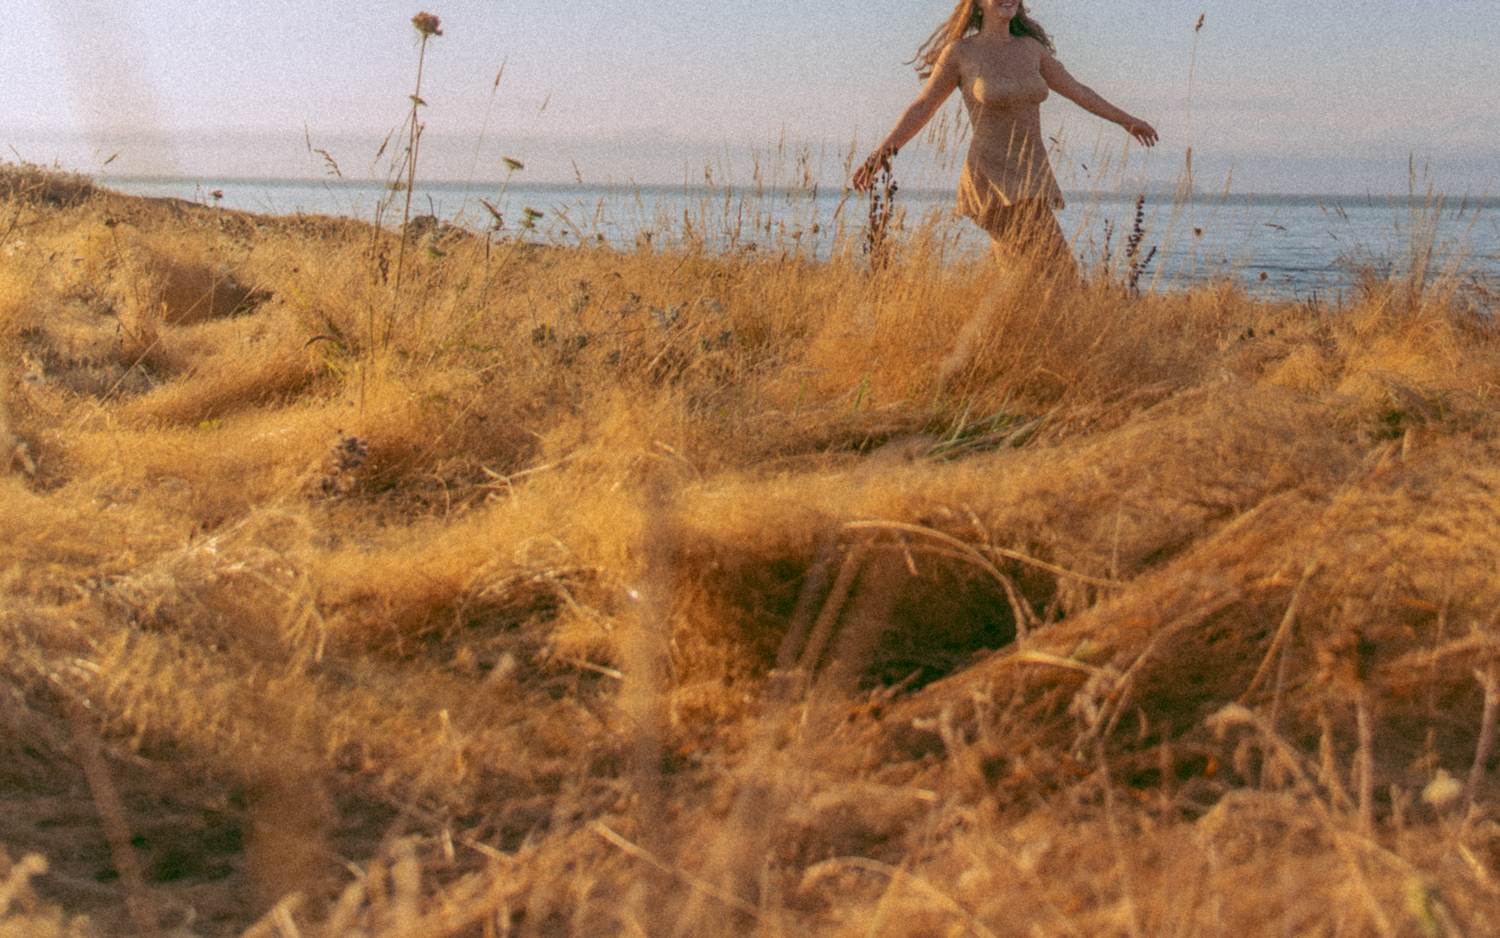 Model is dancing in a field with arms out, her face is cut off above her smile. Tall yellow grass and blue skies make up the surroundings. We see the ocean in the distance. Lau is wearing a beige slip.